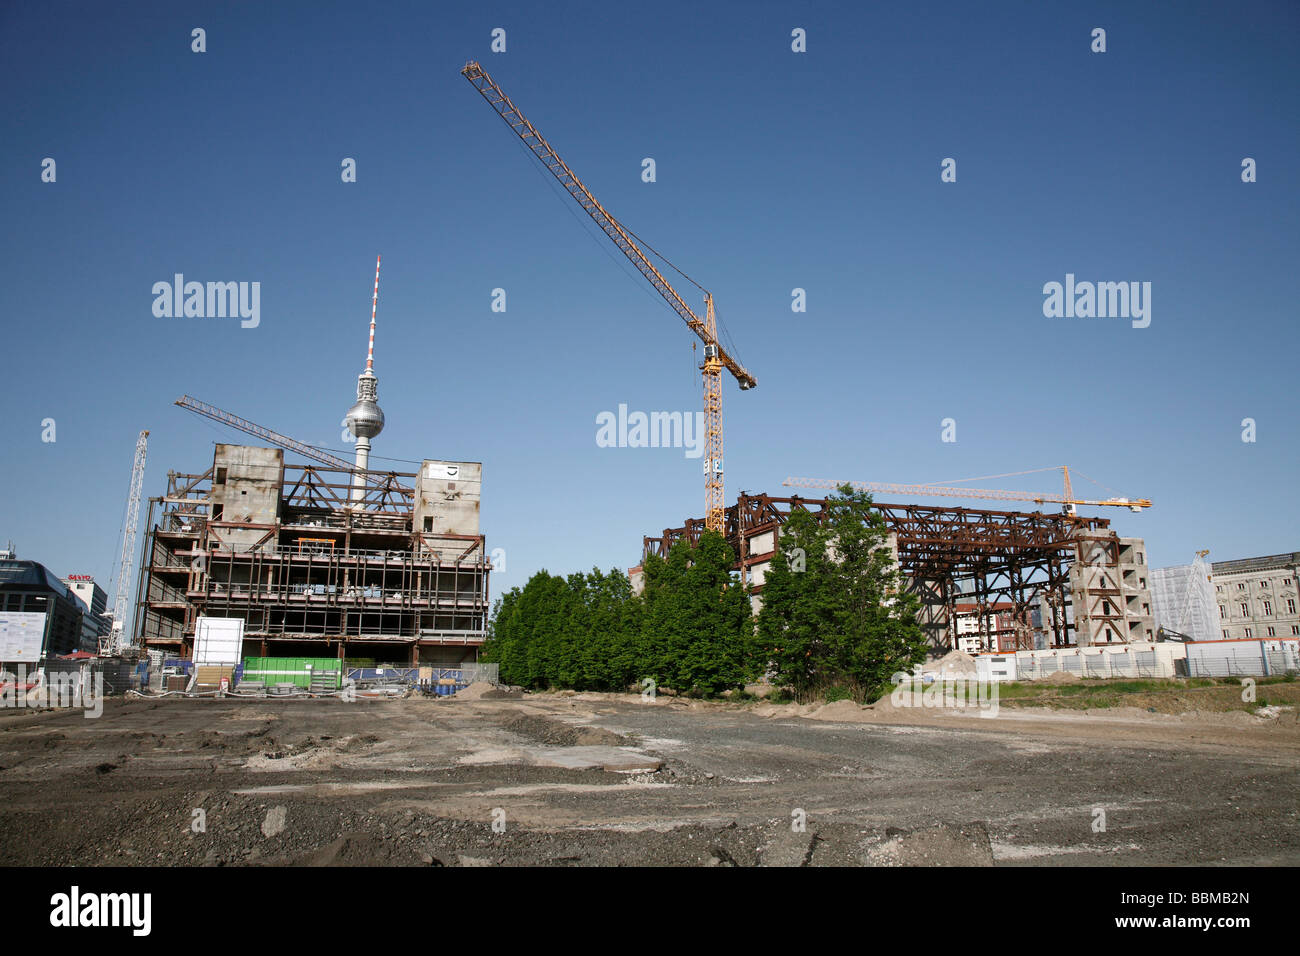 Fernsehturm TV tower behind the deconstruction of the Palace of the Republic with construction cranes, Berlin, Germany, Europe Stock Photo